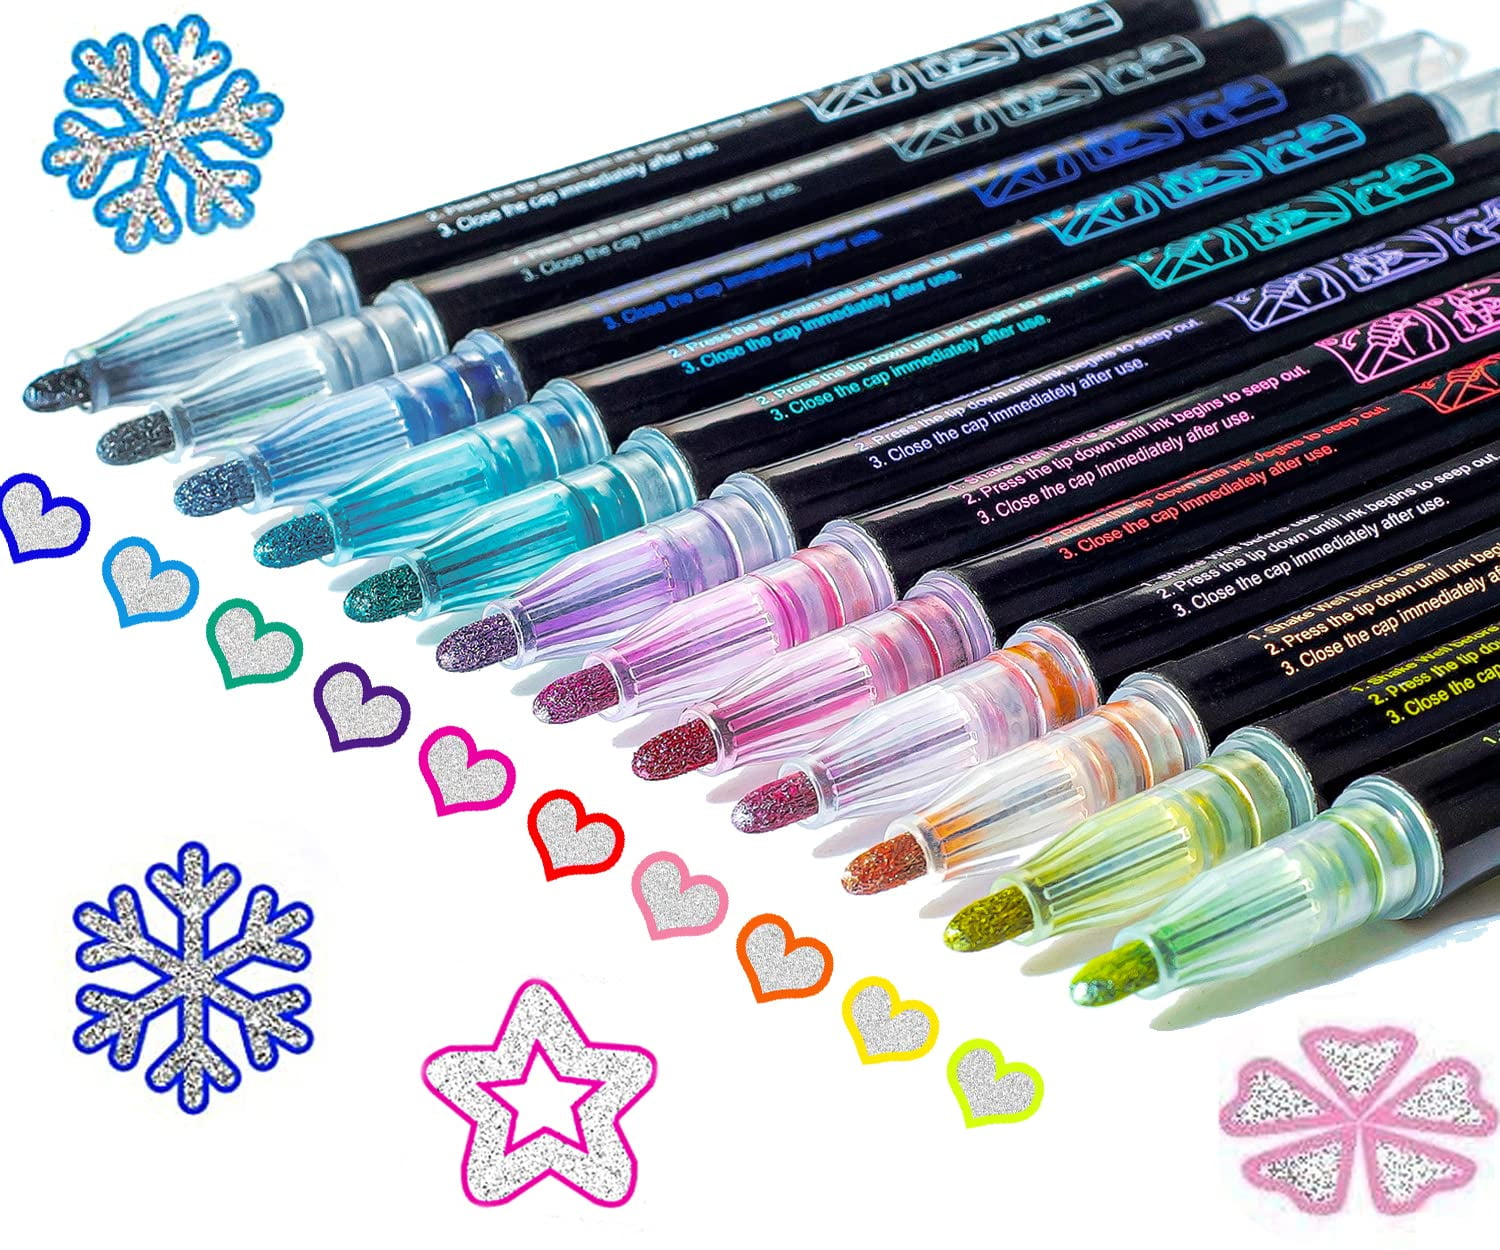 ZEYAR Glitter Paint Pens, Water-Based, Medium Point,12 Assorted Colors, Great for Greeting Card, Posters, Albums, Gift Cards and Only Light-colored